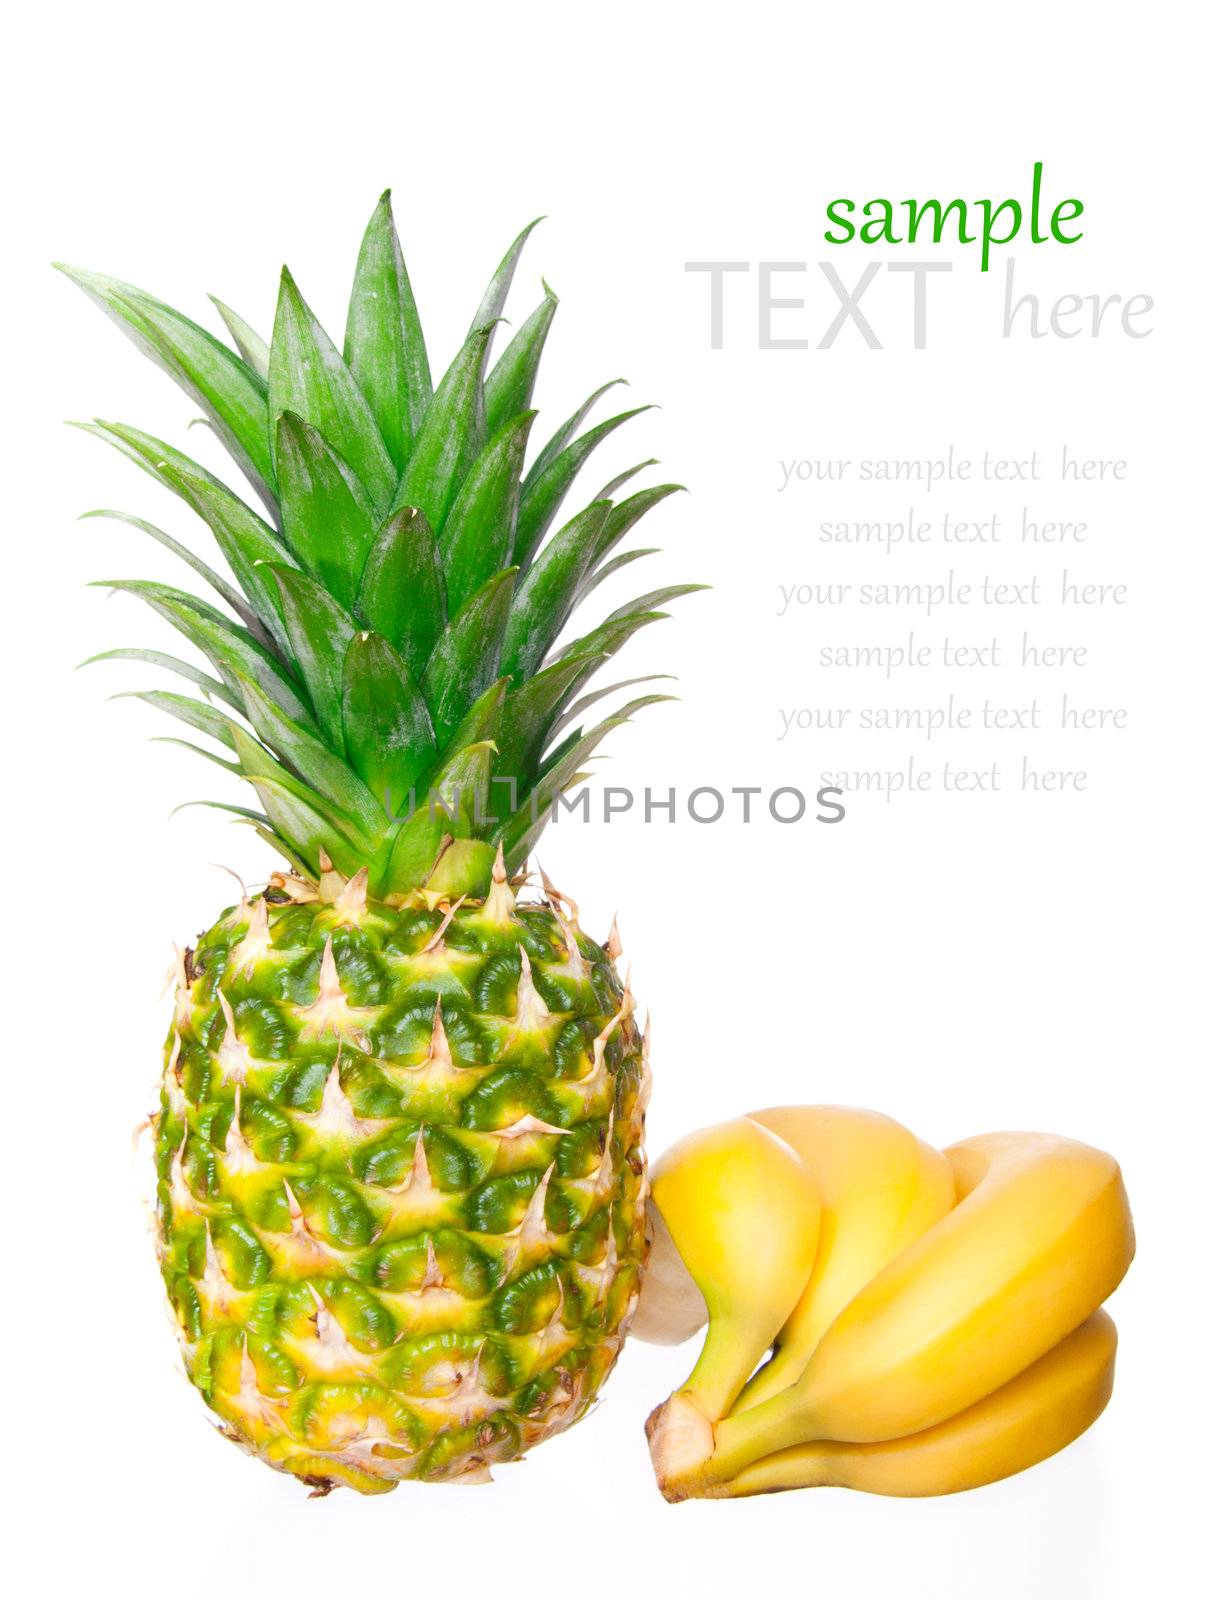 ripe pineapple, bunch of bananas on a white background  by motorolka